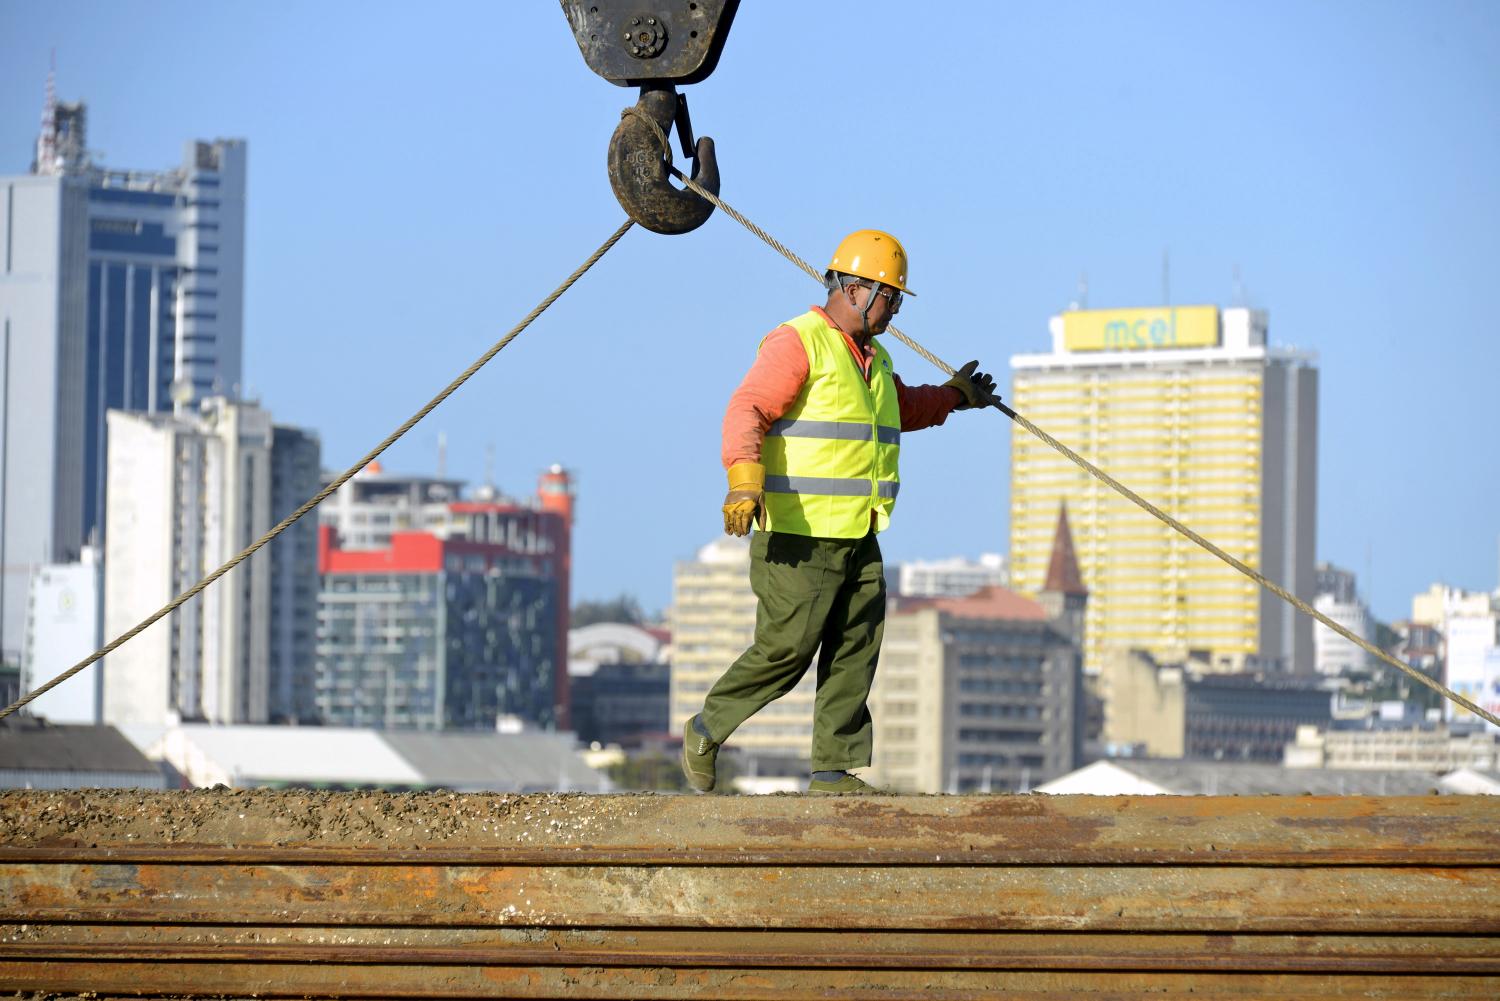 A Chinese construction worker helps build a new bridge against the skyline of Mozambique's capital Maputo April 15, 2016. REUTERS/Grant Lee Neuenburg - GF10000389278